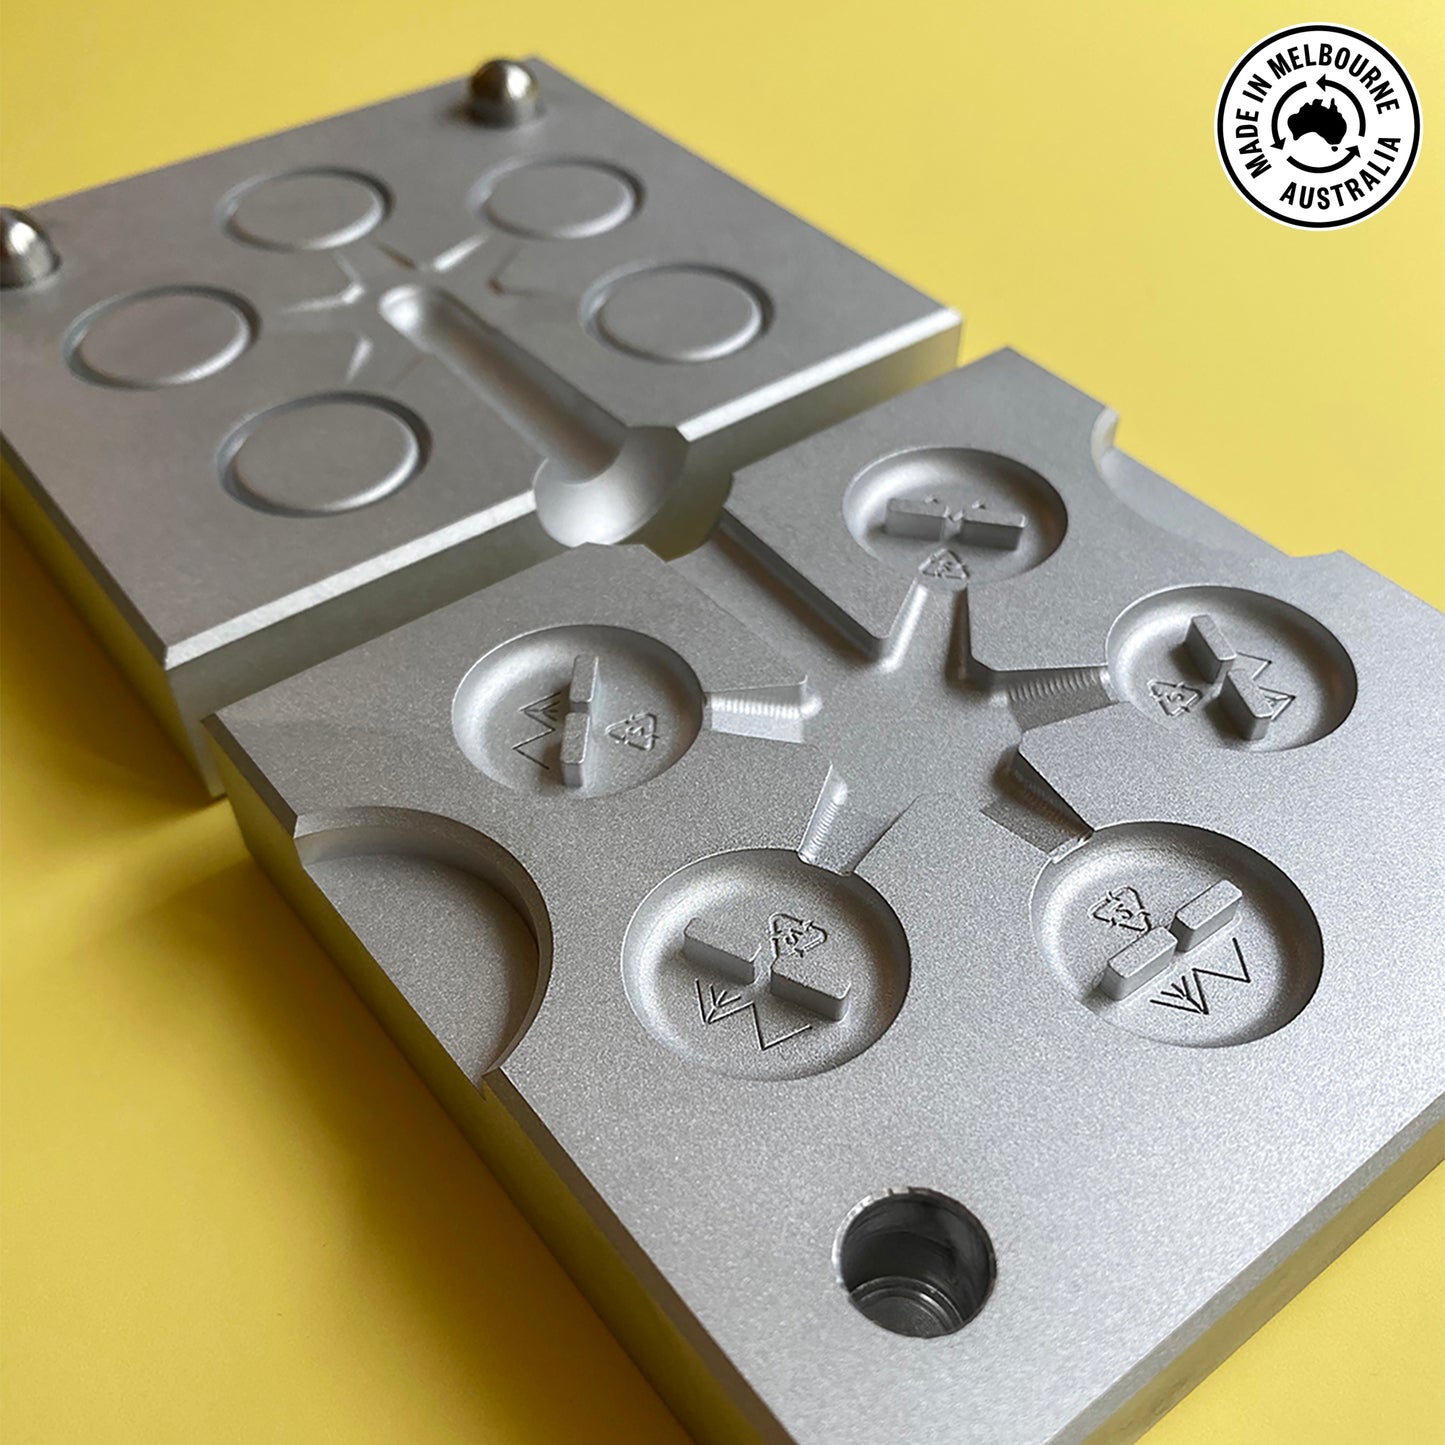 Custom made product moulds, produced in Melbourne Australia by Precious Plastic Mebourne